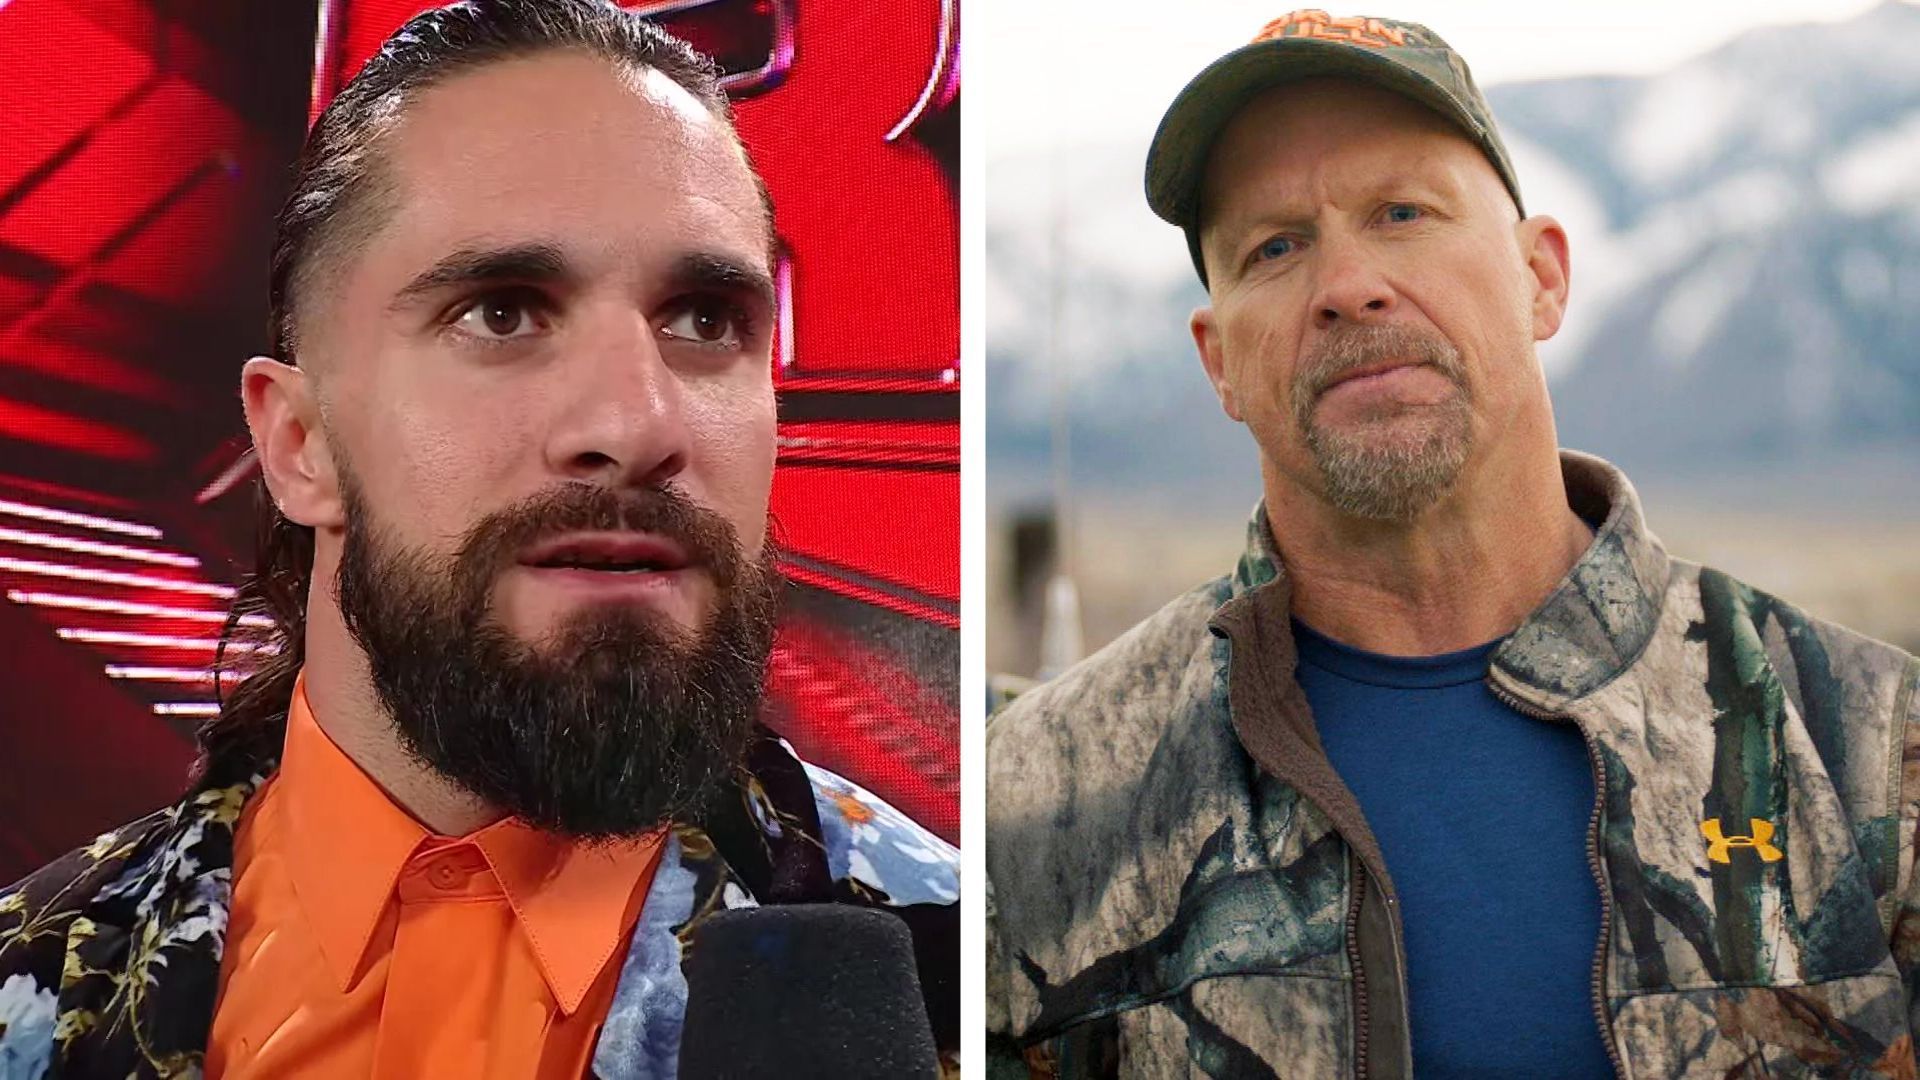 Could Seth Rollins have a match with Stone Cold Steve Austin?